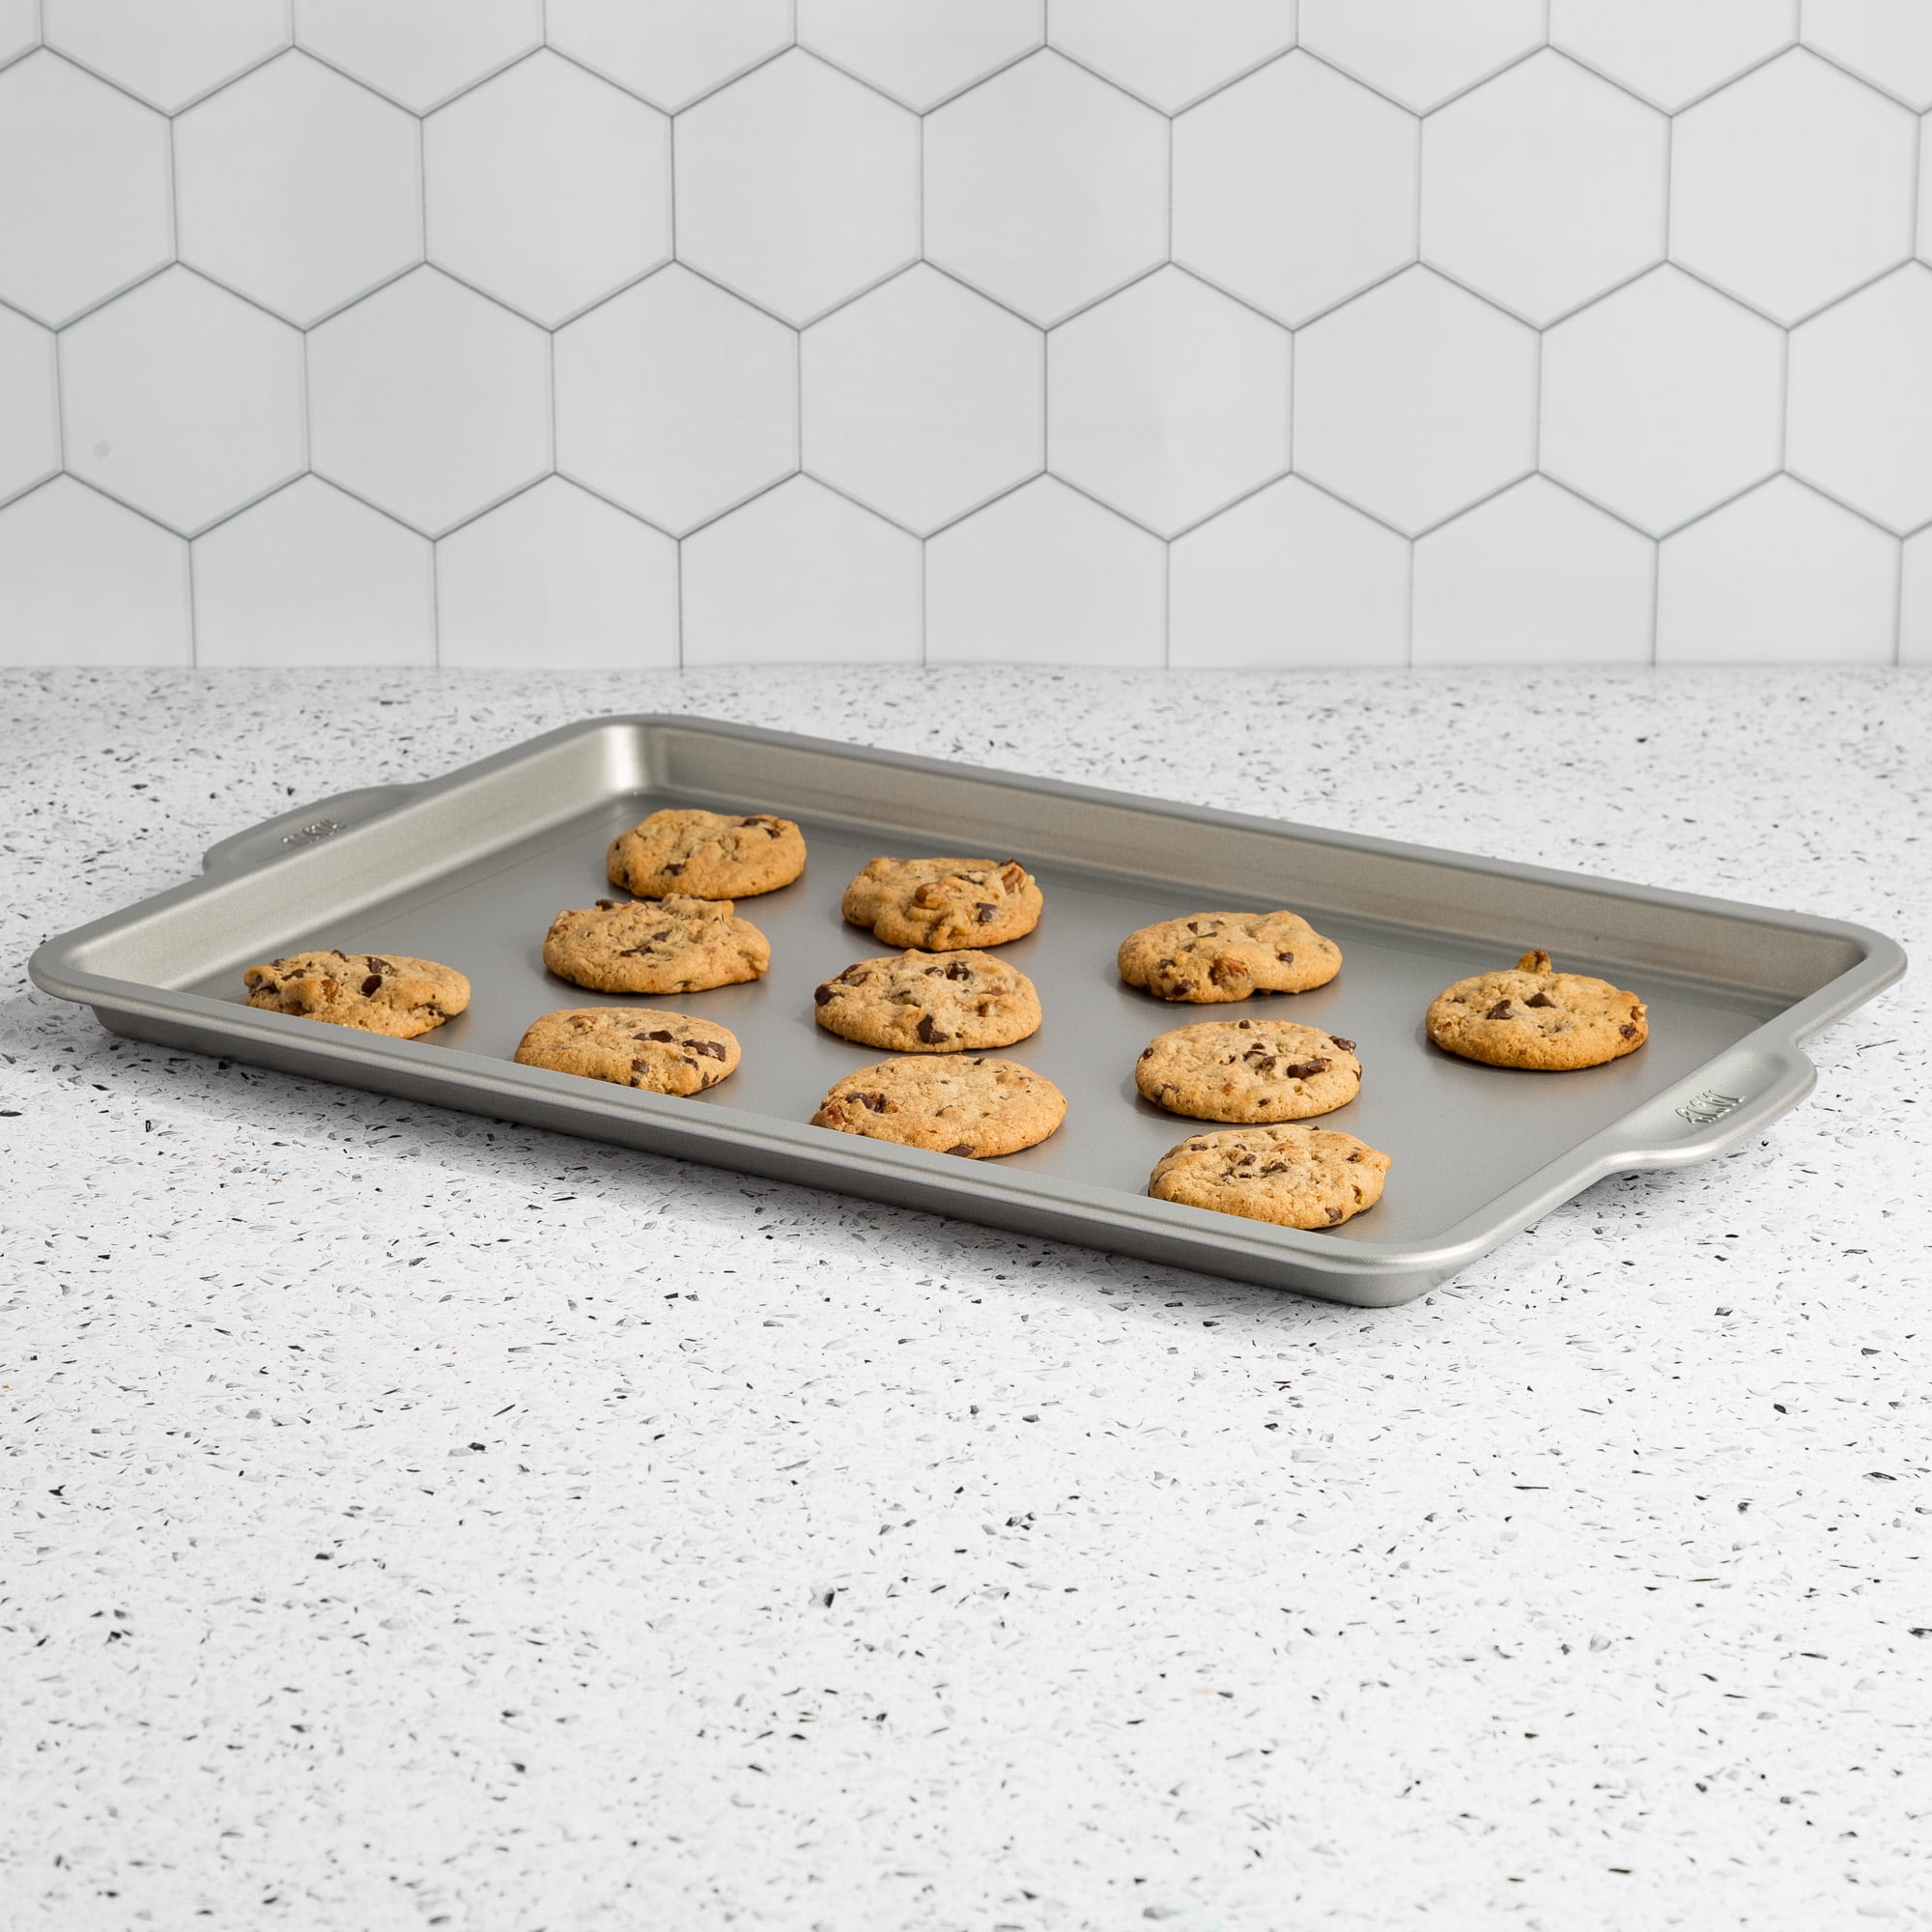 12 x 17 Non-Stick Jumbo Cookie Sheet Carbon Steel - Made By Design 1 ct